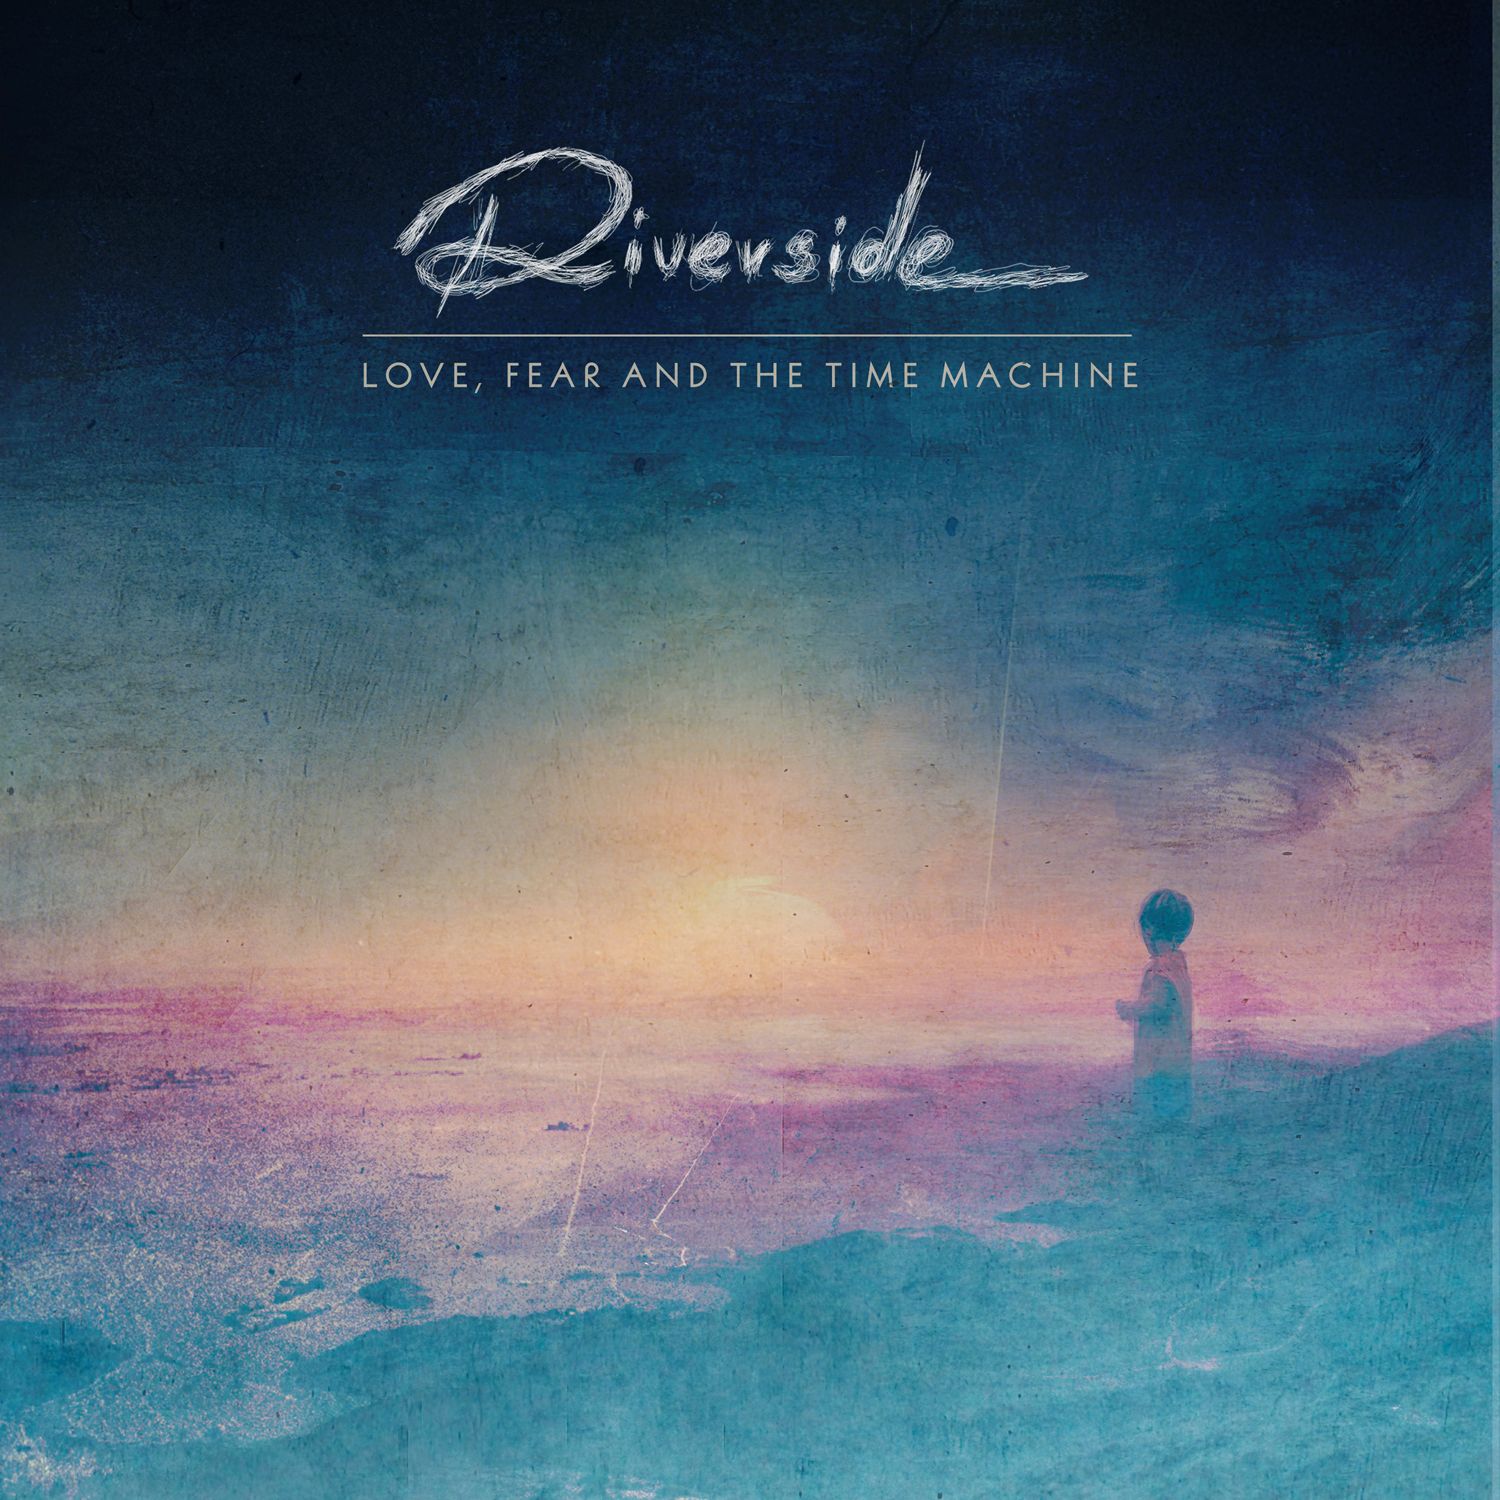 Riverside: Love, Fear and the Time Machine